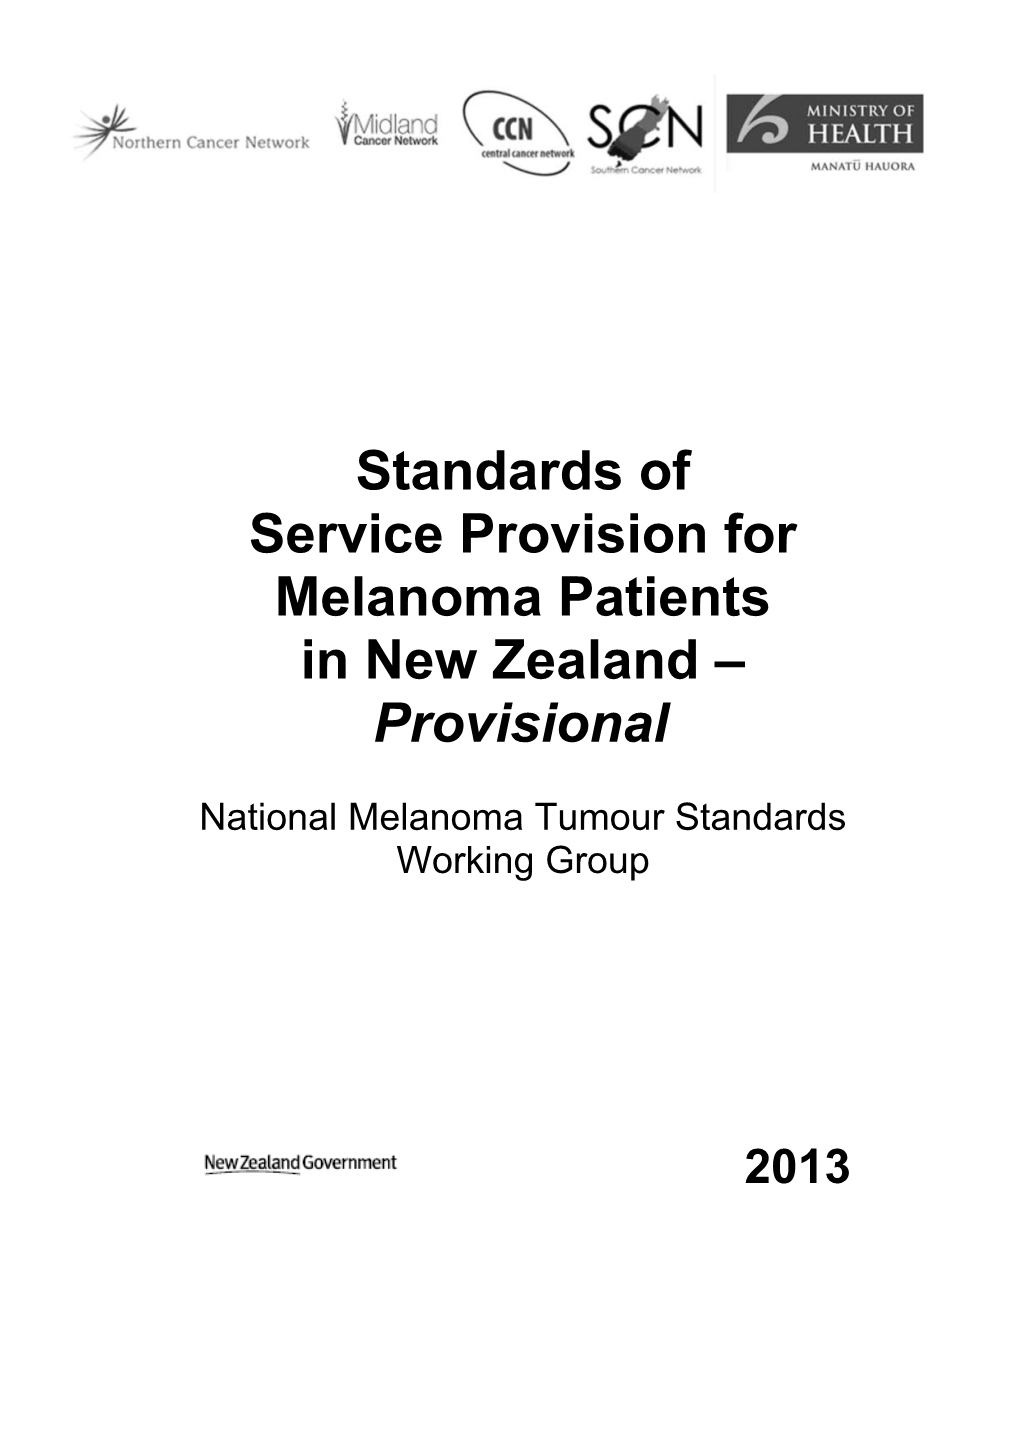 Standards of Service Provision for Melanoma Patients in New Zealand Provisional